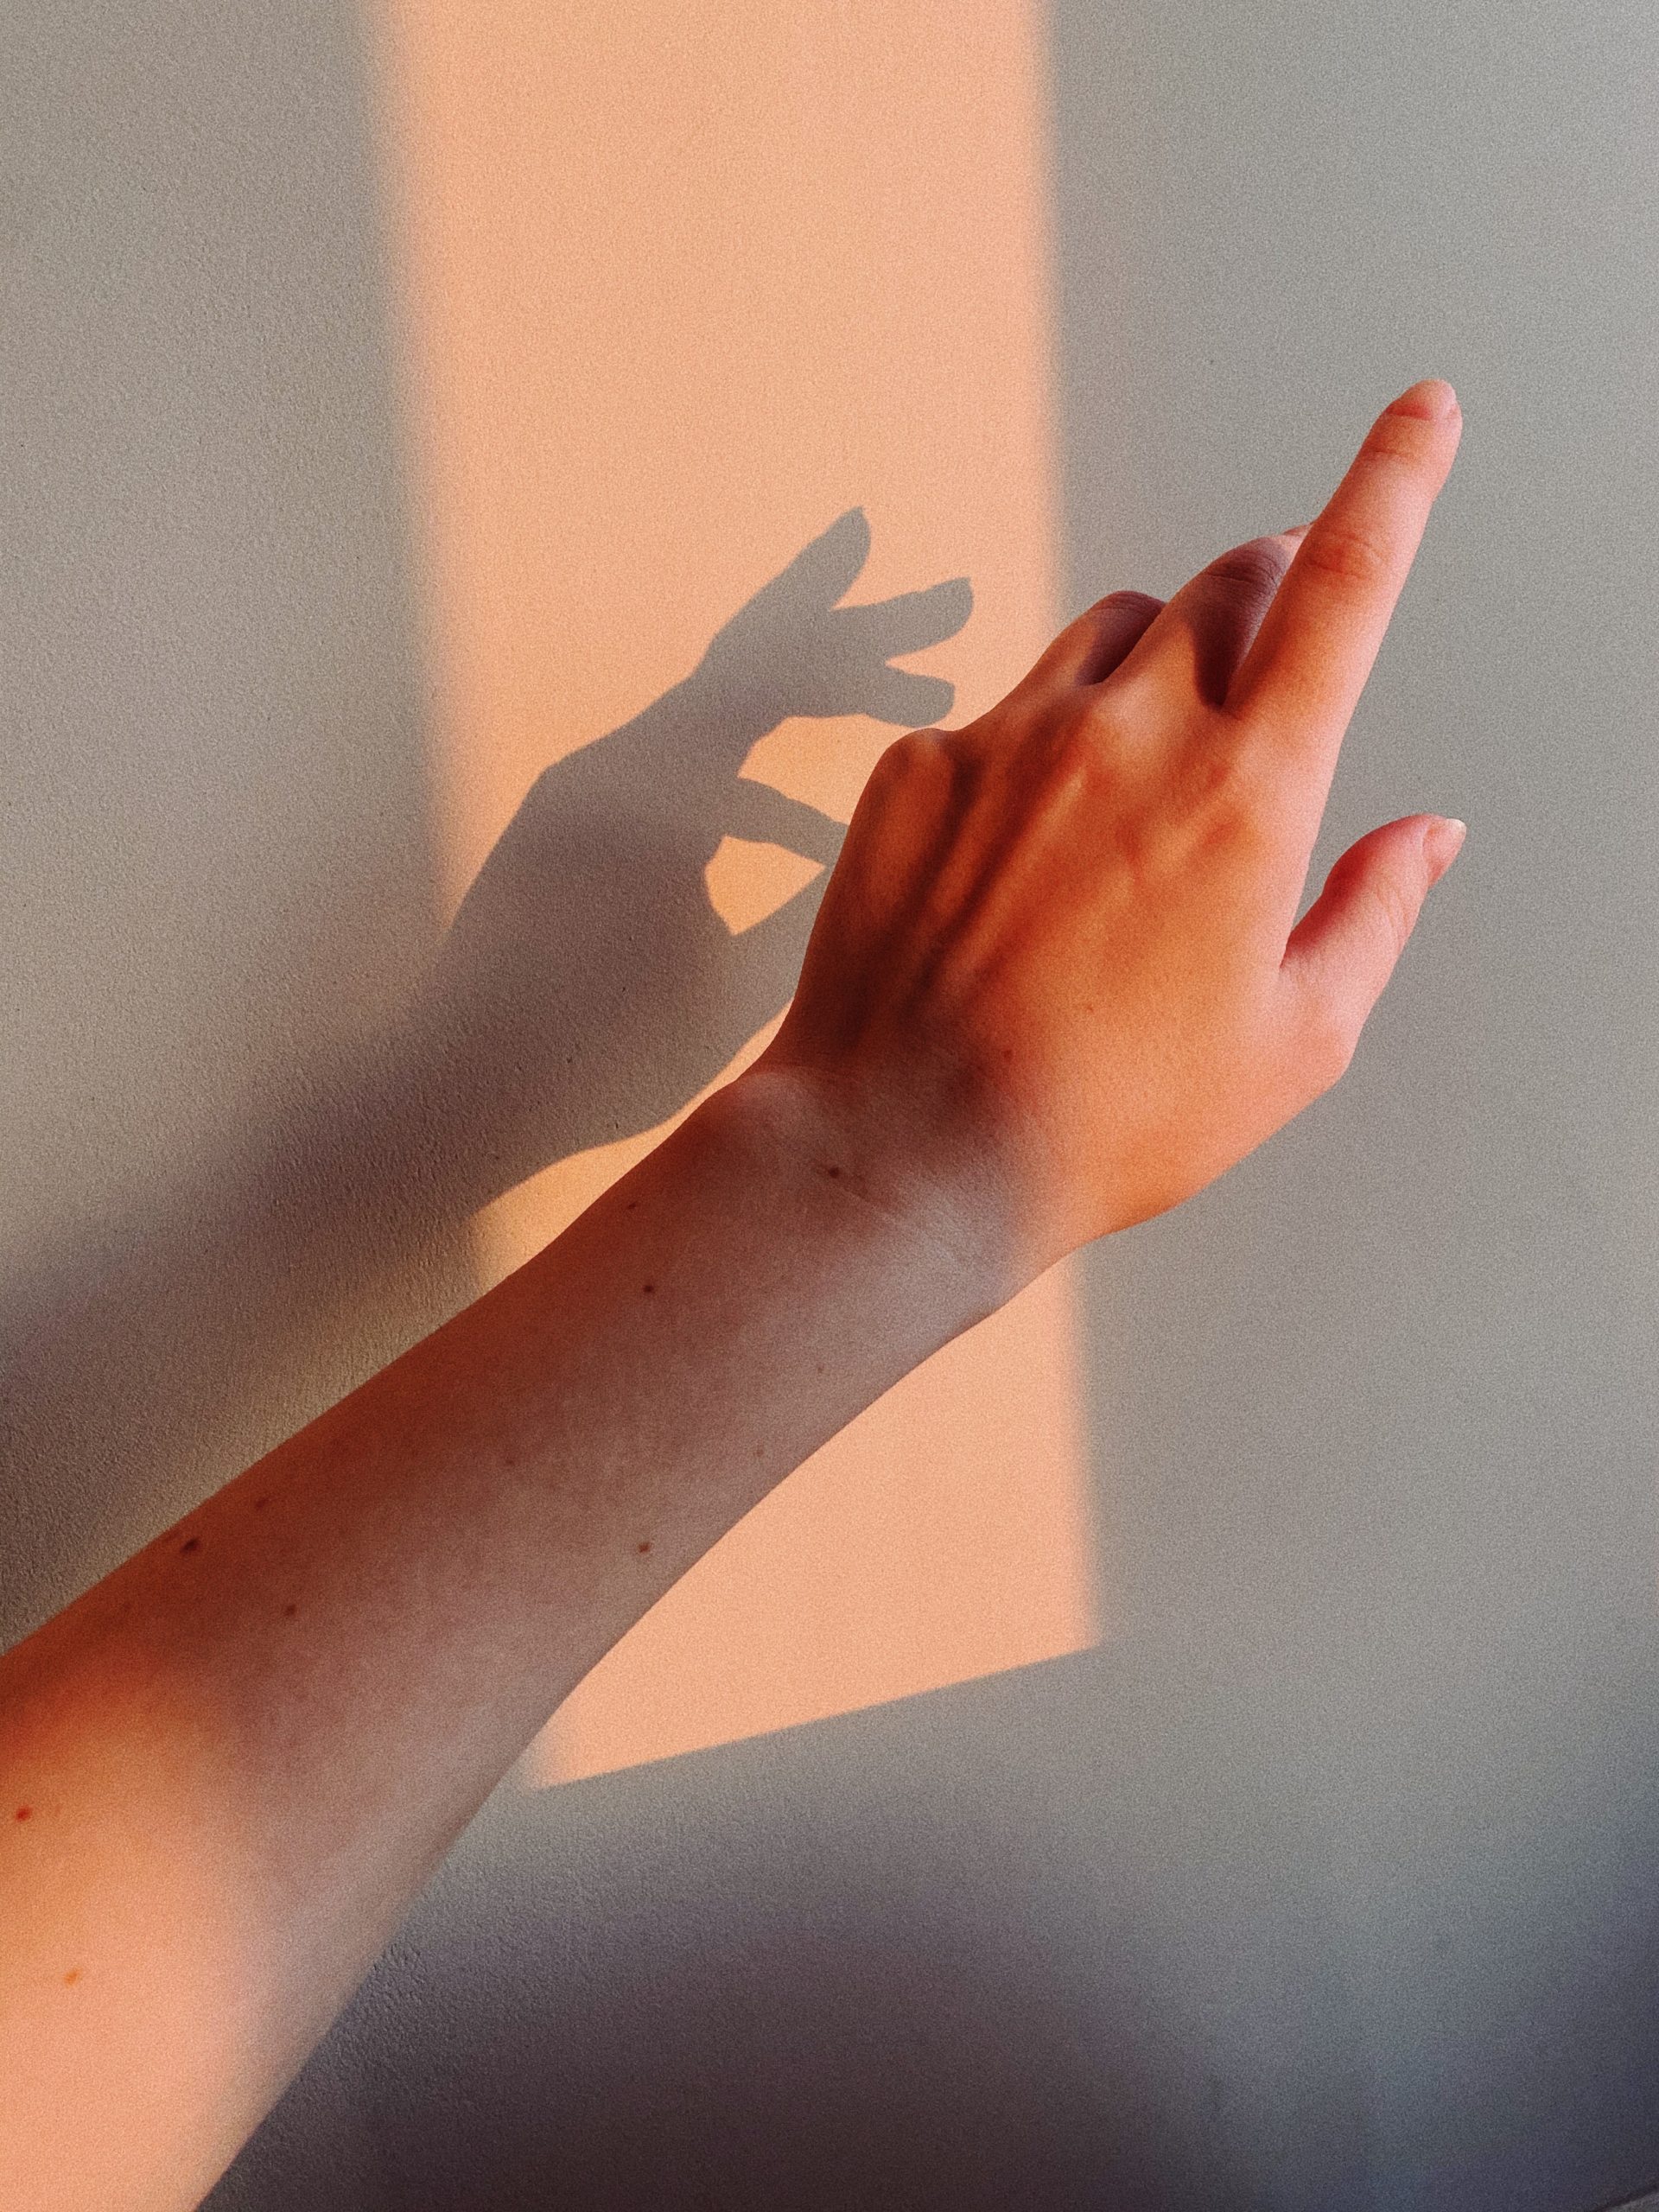 shadow of woman's hand pointing